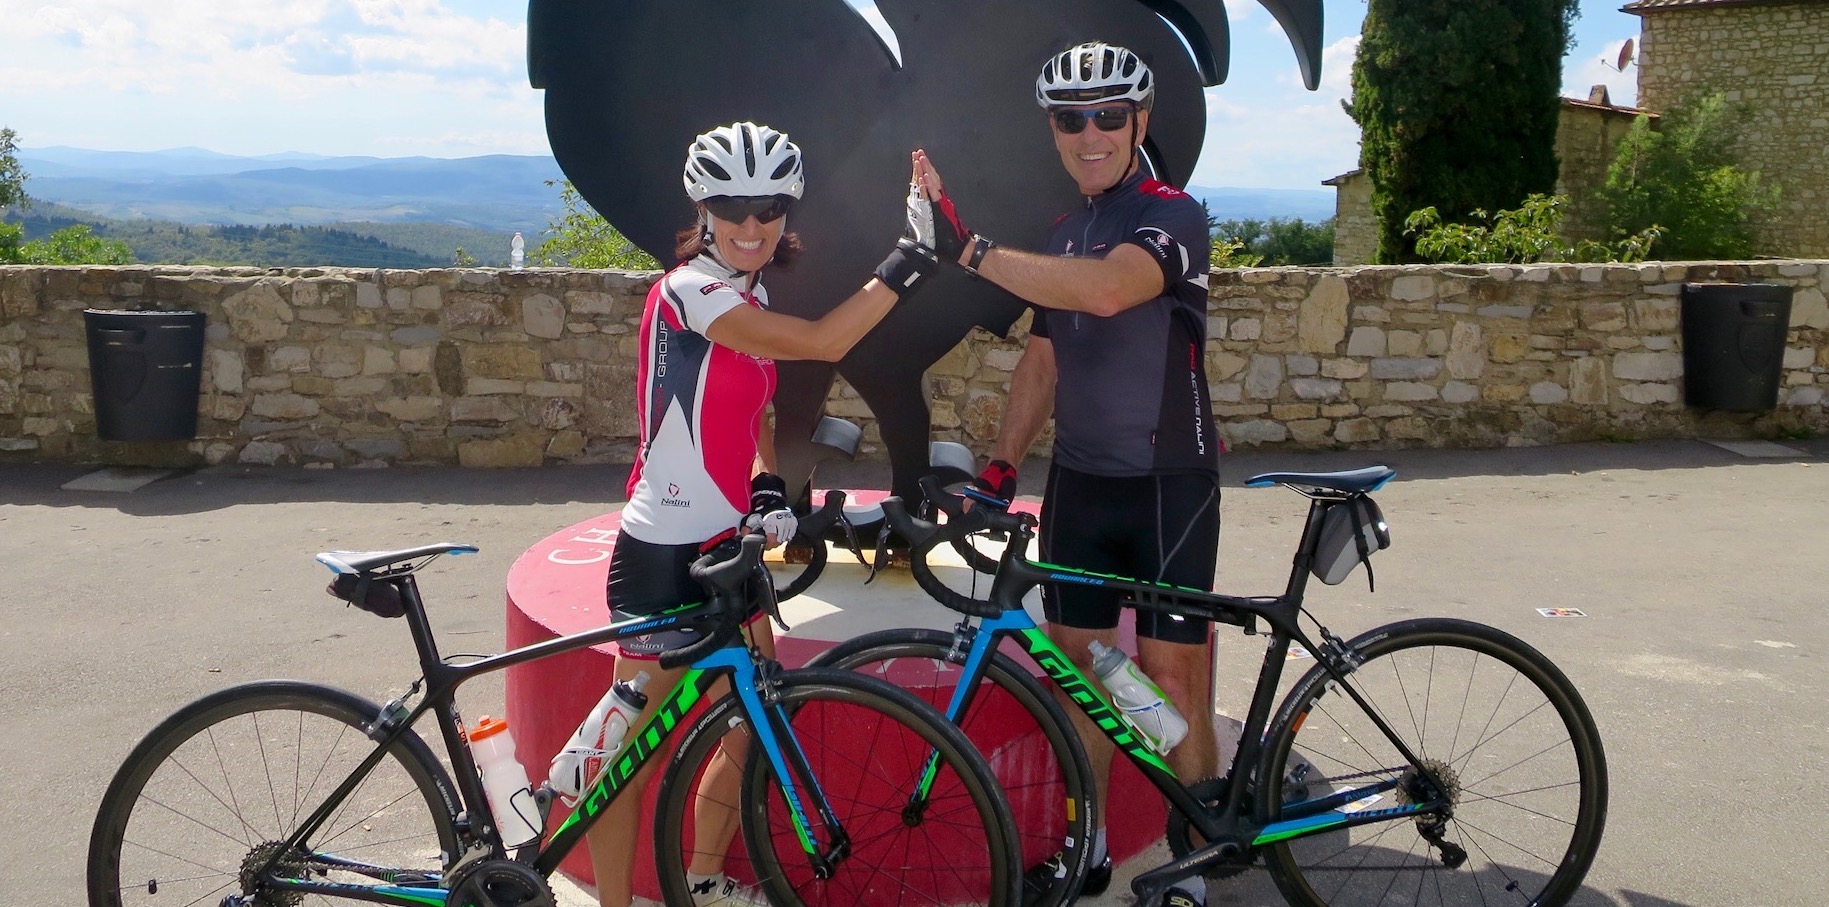 Mr.&Ms. Fortin from Canada enjoying Toscana by road bike... 